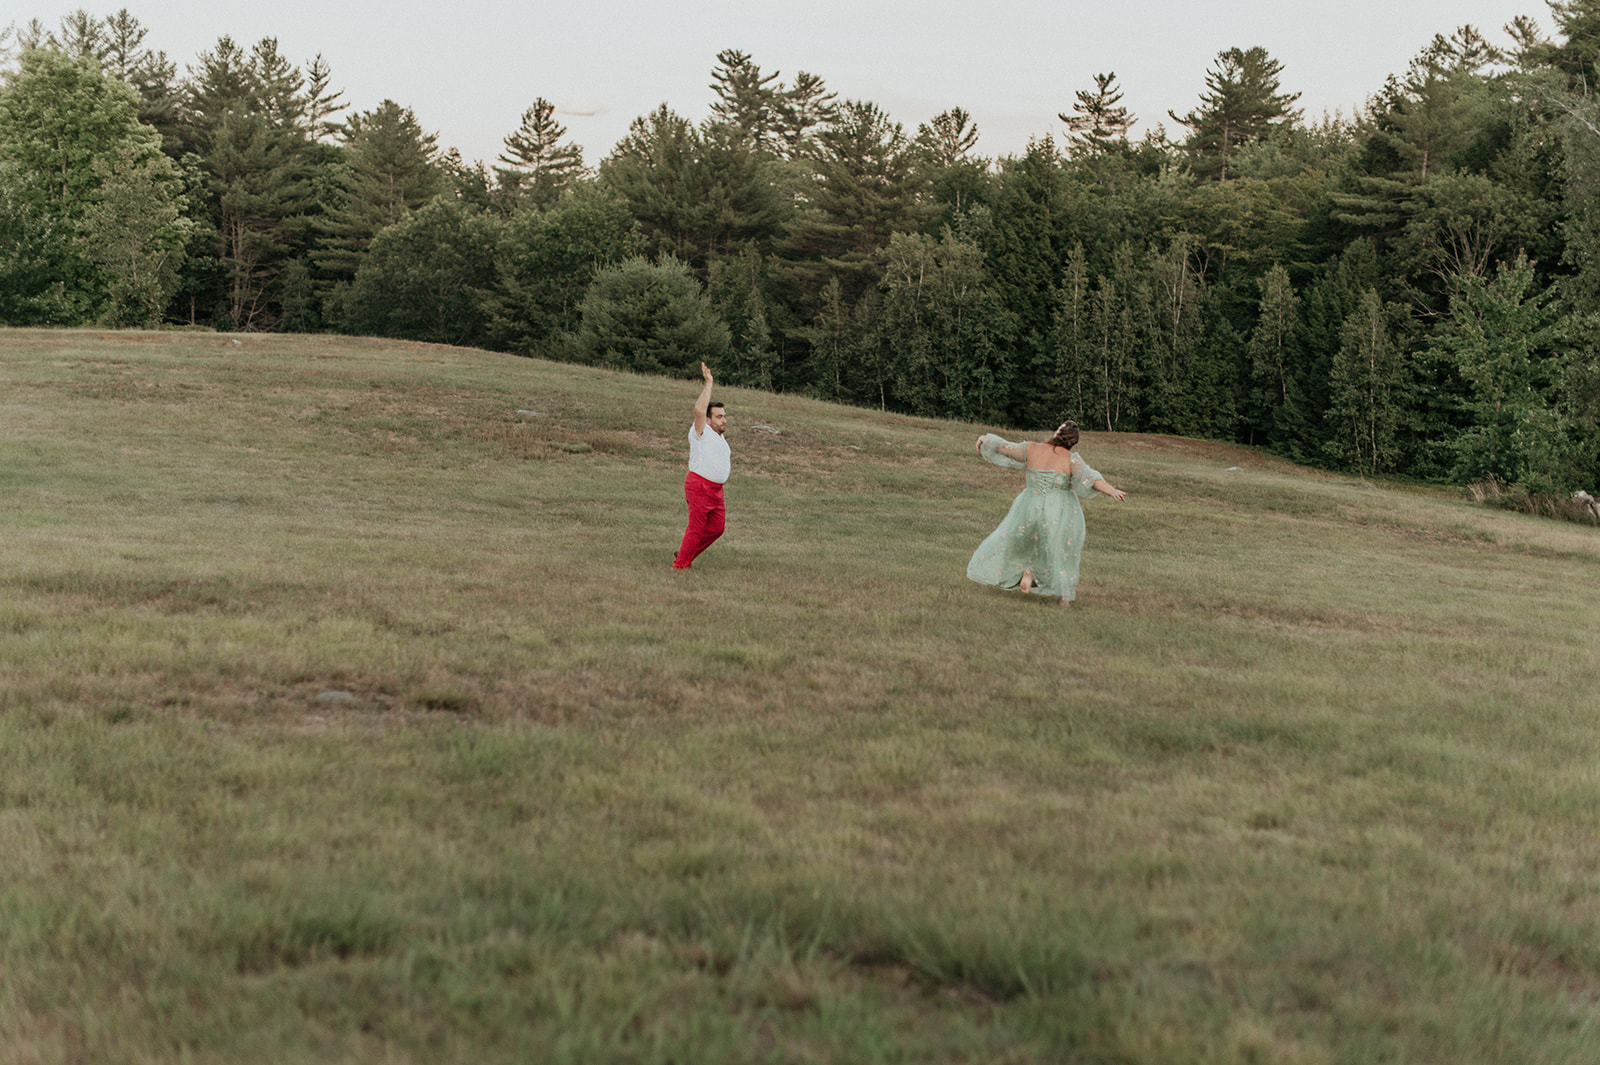 Bride and groom sunset portraits in colorful reception outfits at the preserve at chocorua